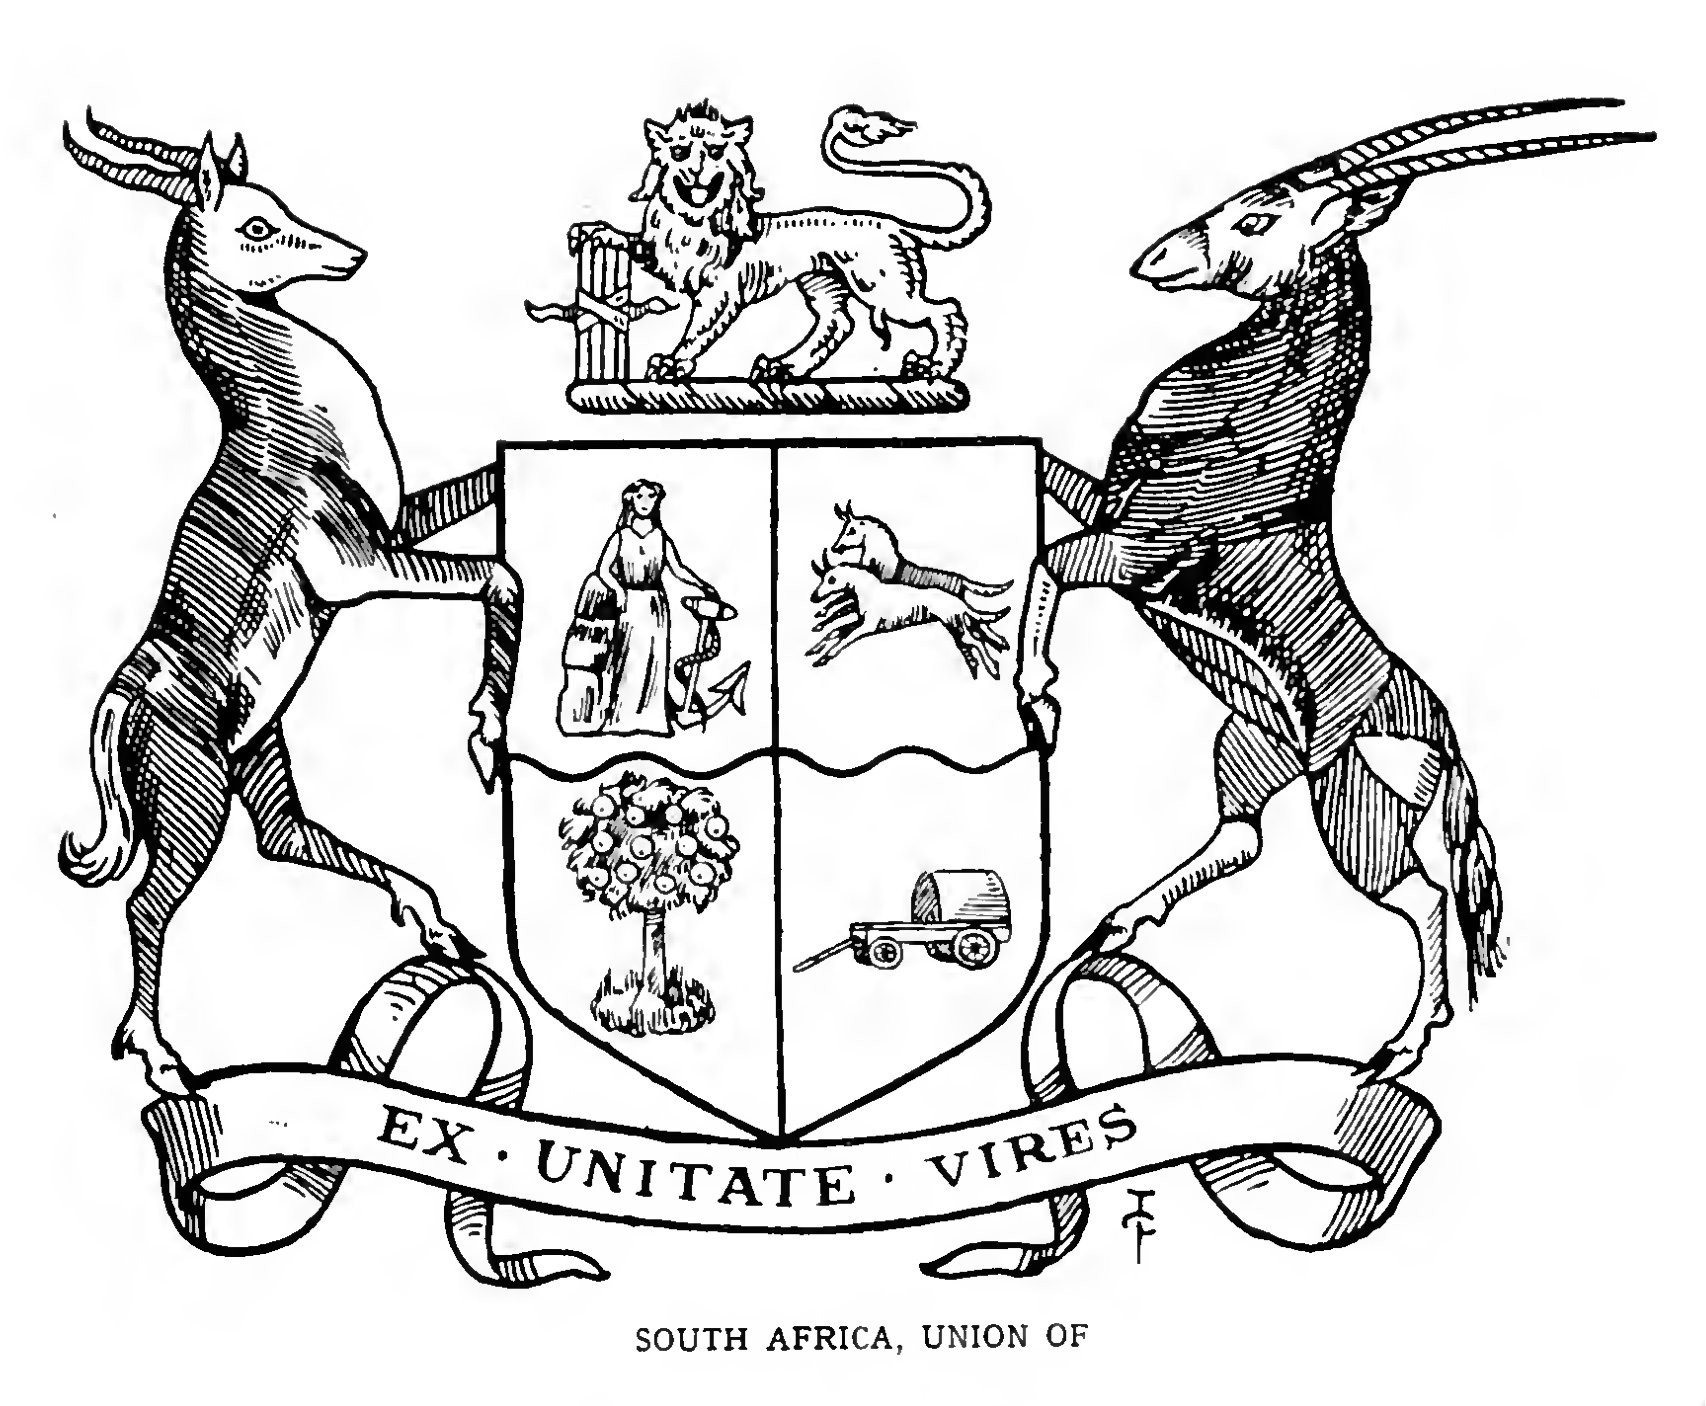 SOUTH AFRICA, Union of.